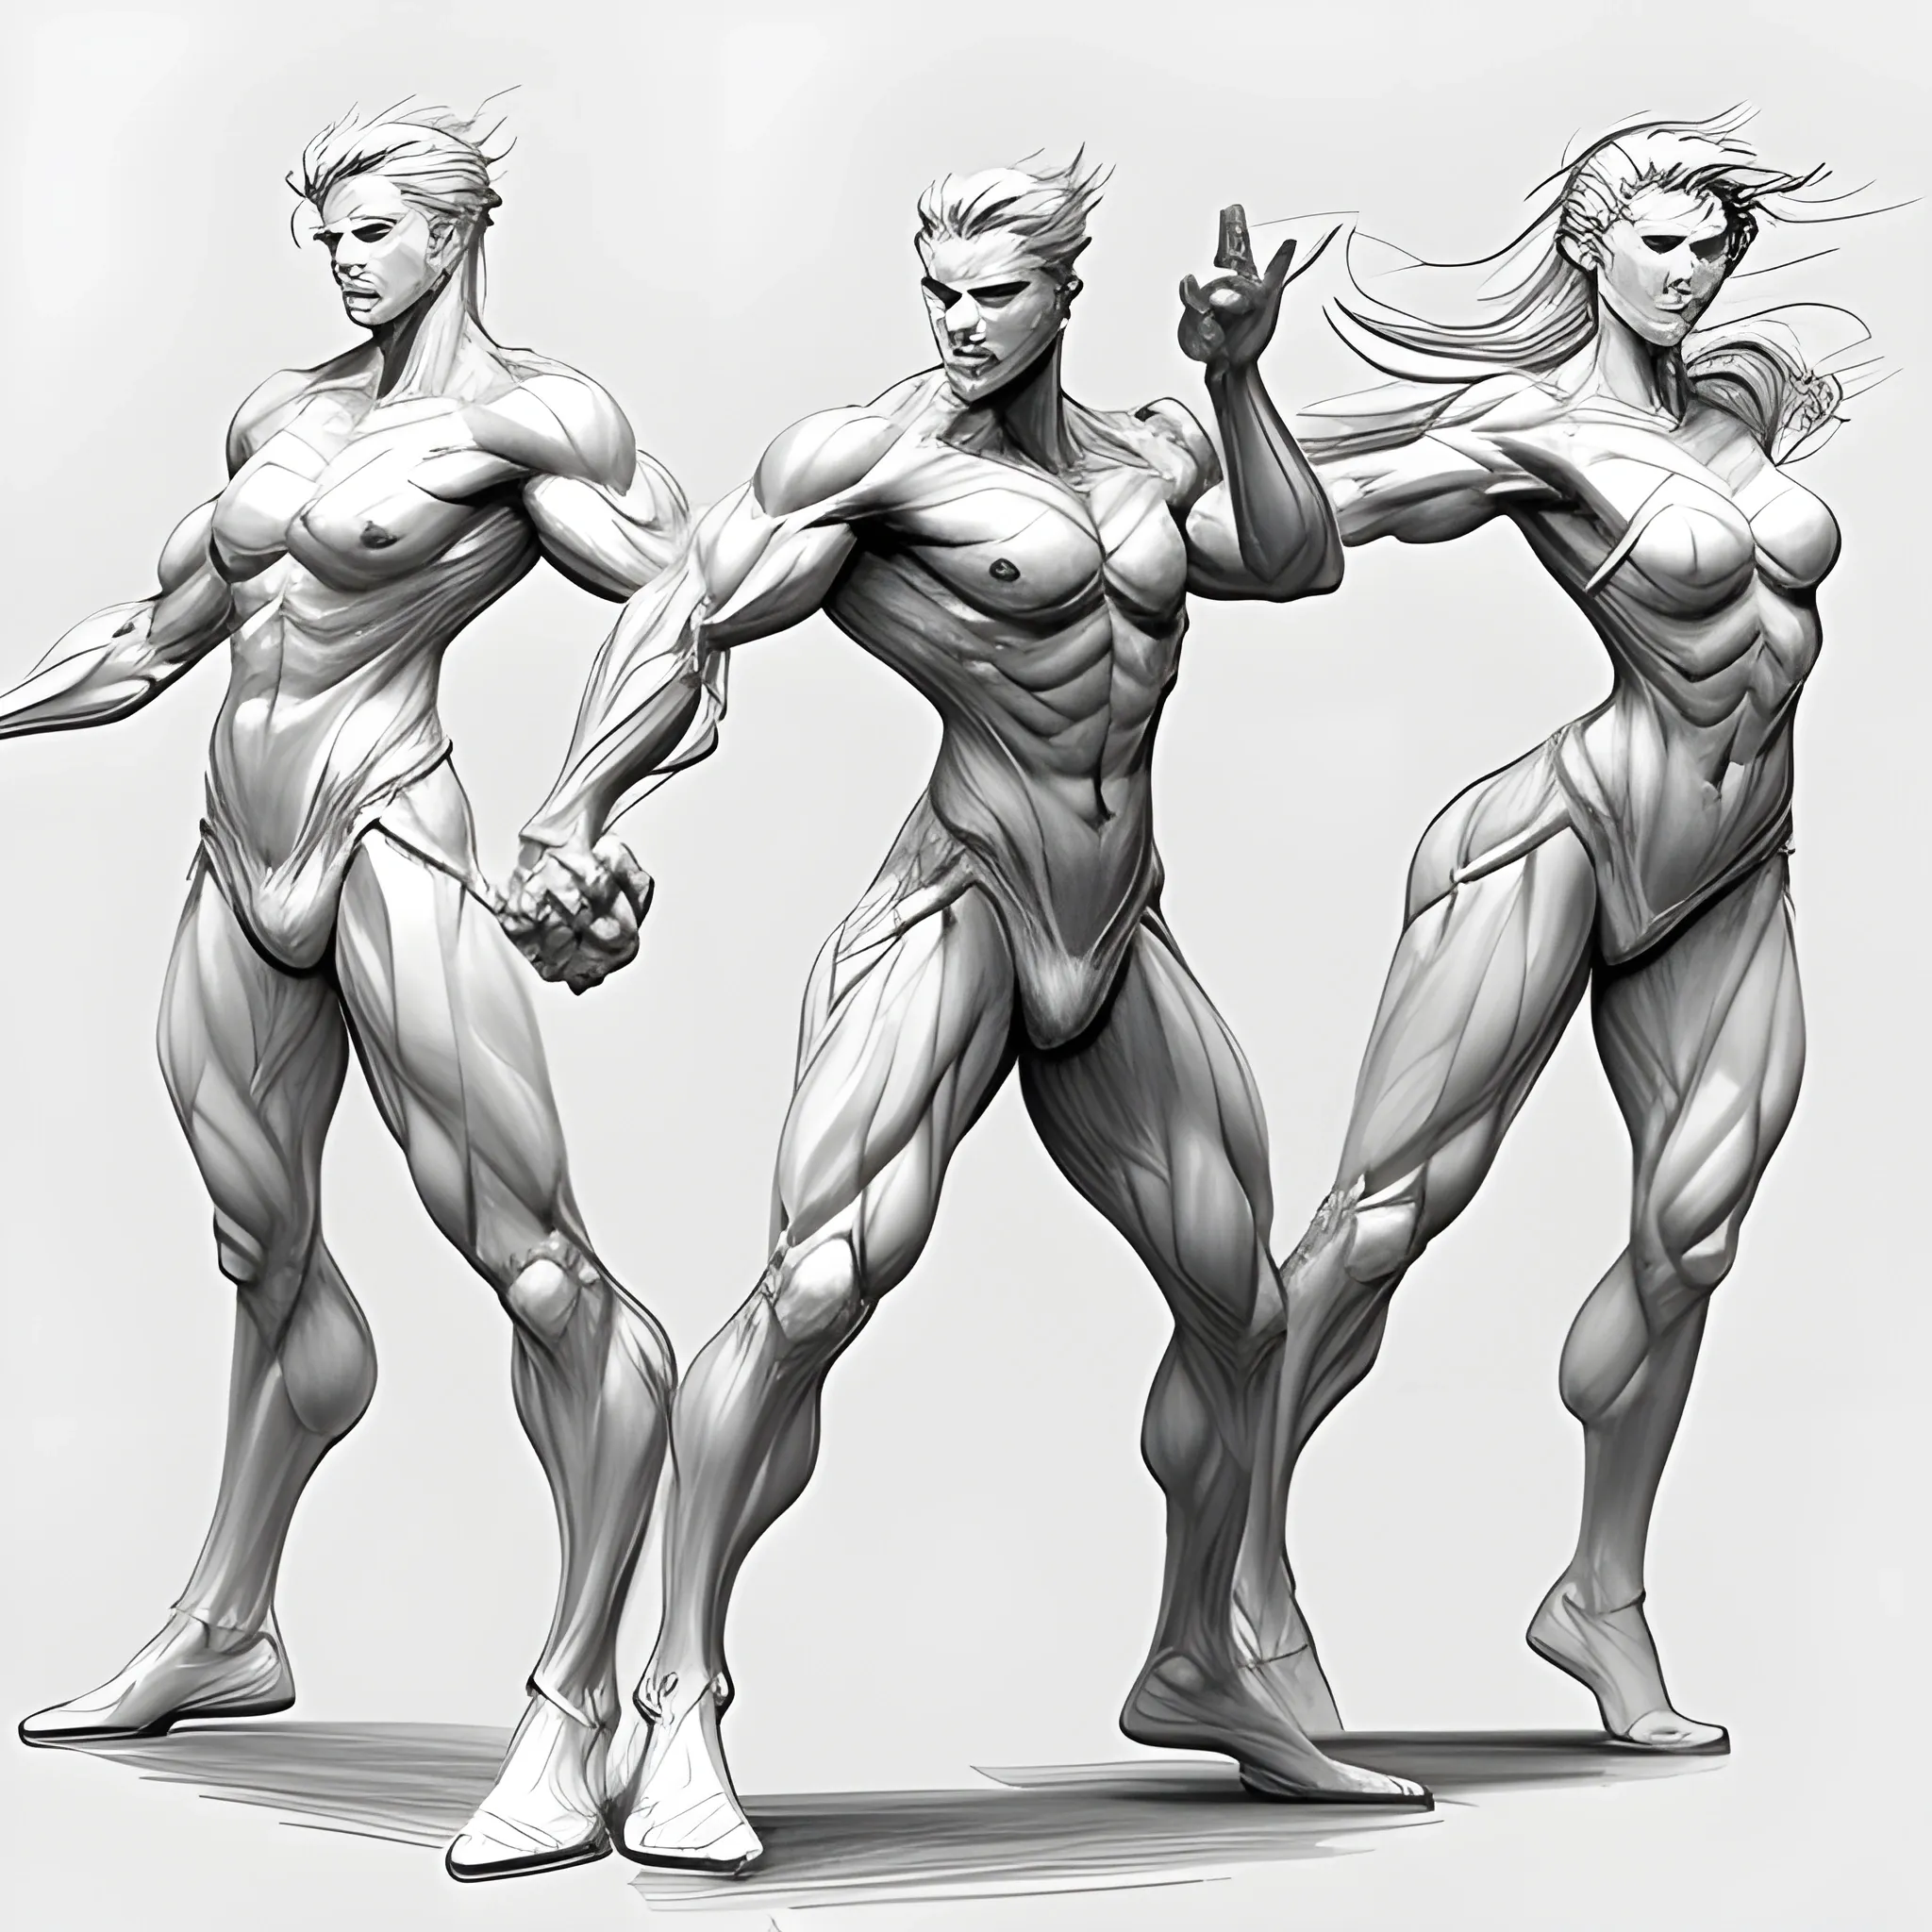 Anime art - 2 dynamic poses for reference | Facebook